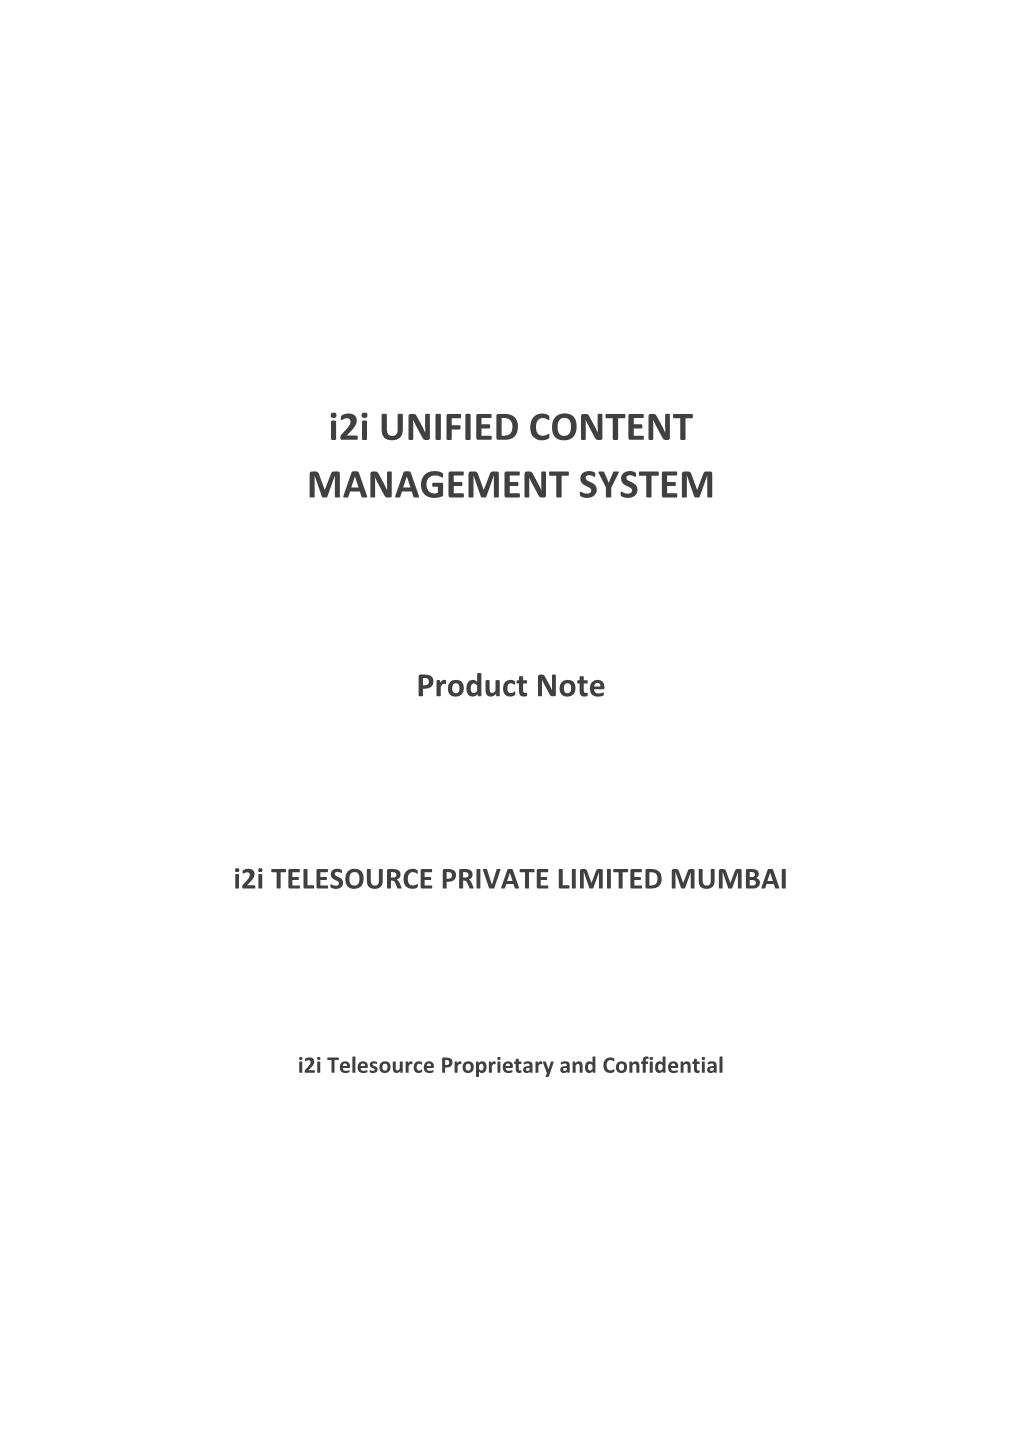 I2i UNIFIED CONTENT MANAGEMENT SYSTEM